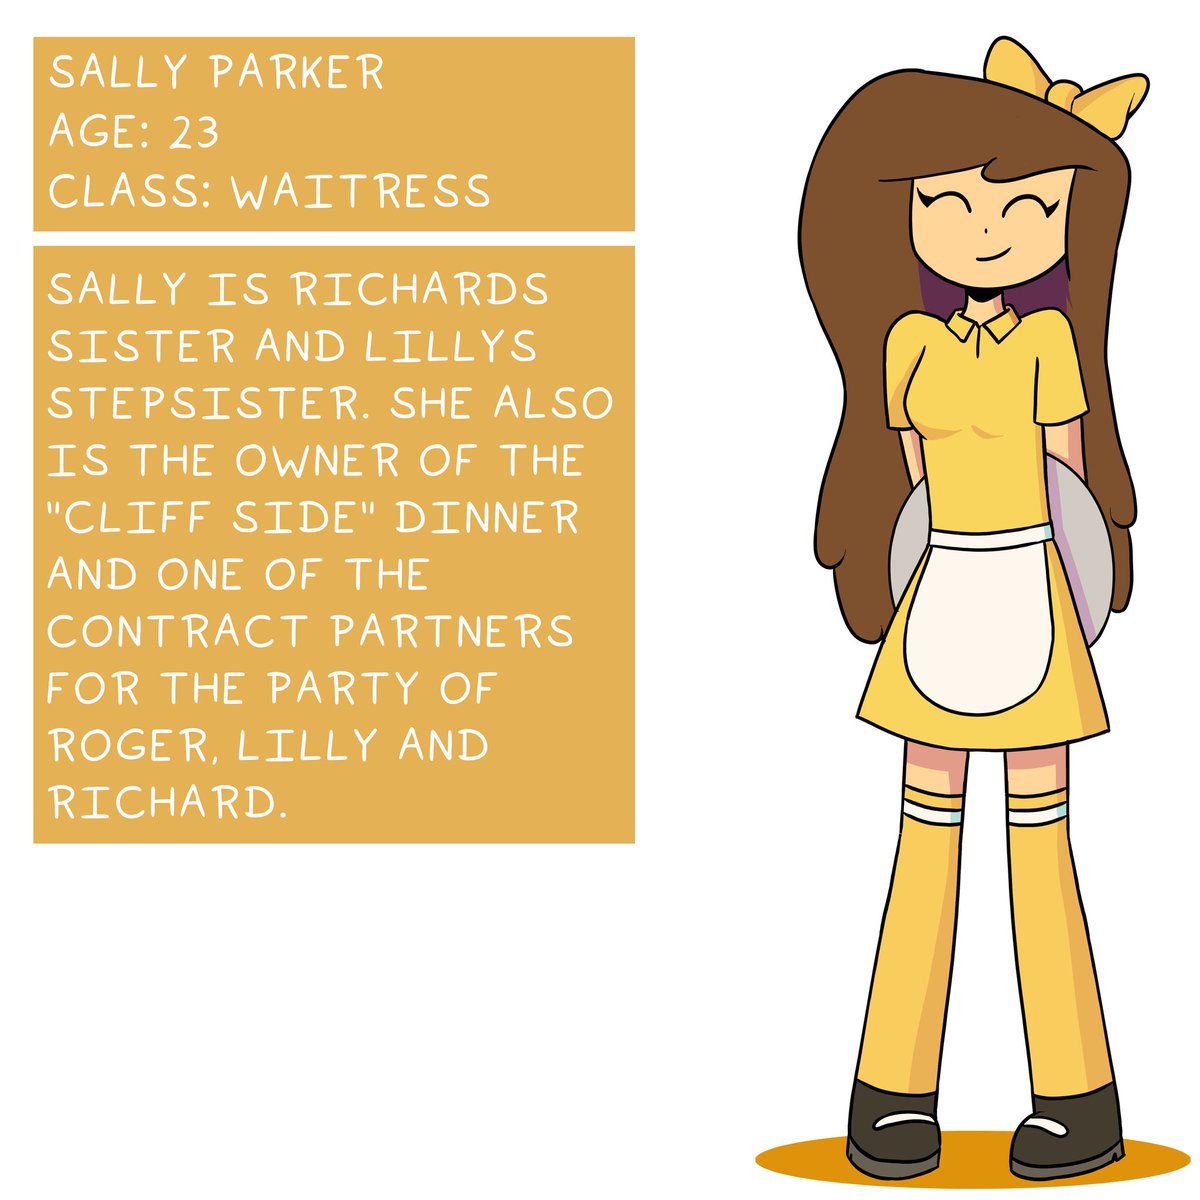 Here's the next one! Sally Parker owner of the "Cliff Side" dinner. She's just a normal waitress though. She moved away when she was 19 years old. She bought the dinner and founded the "Cliff Side" dinner. She now takes care for her (step-)siblings. #digitalart  #charactersheet